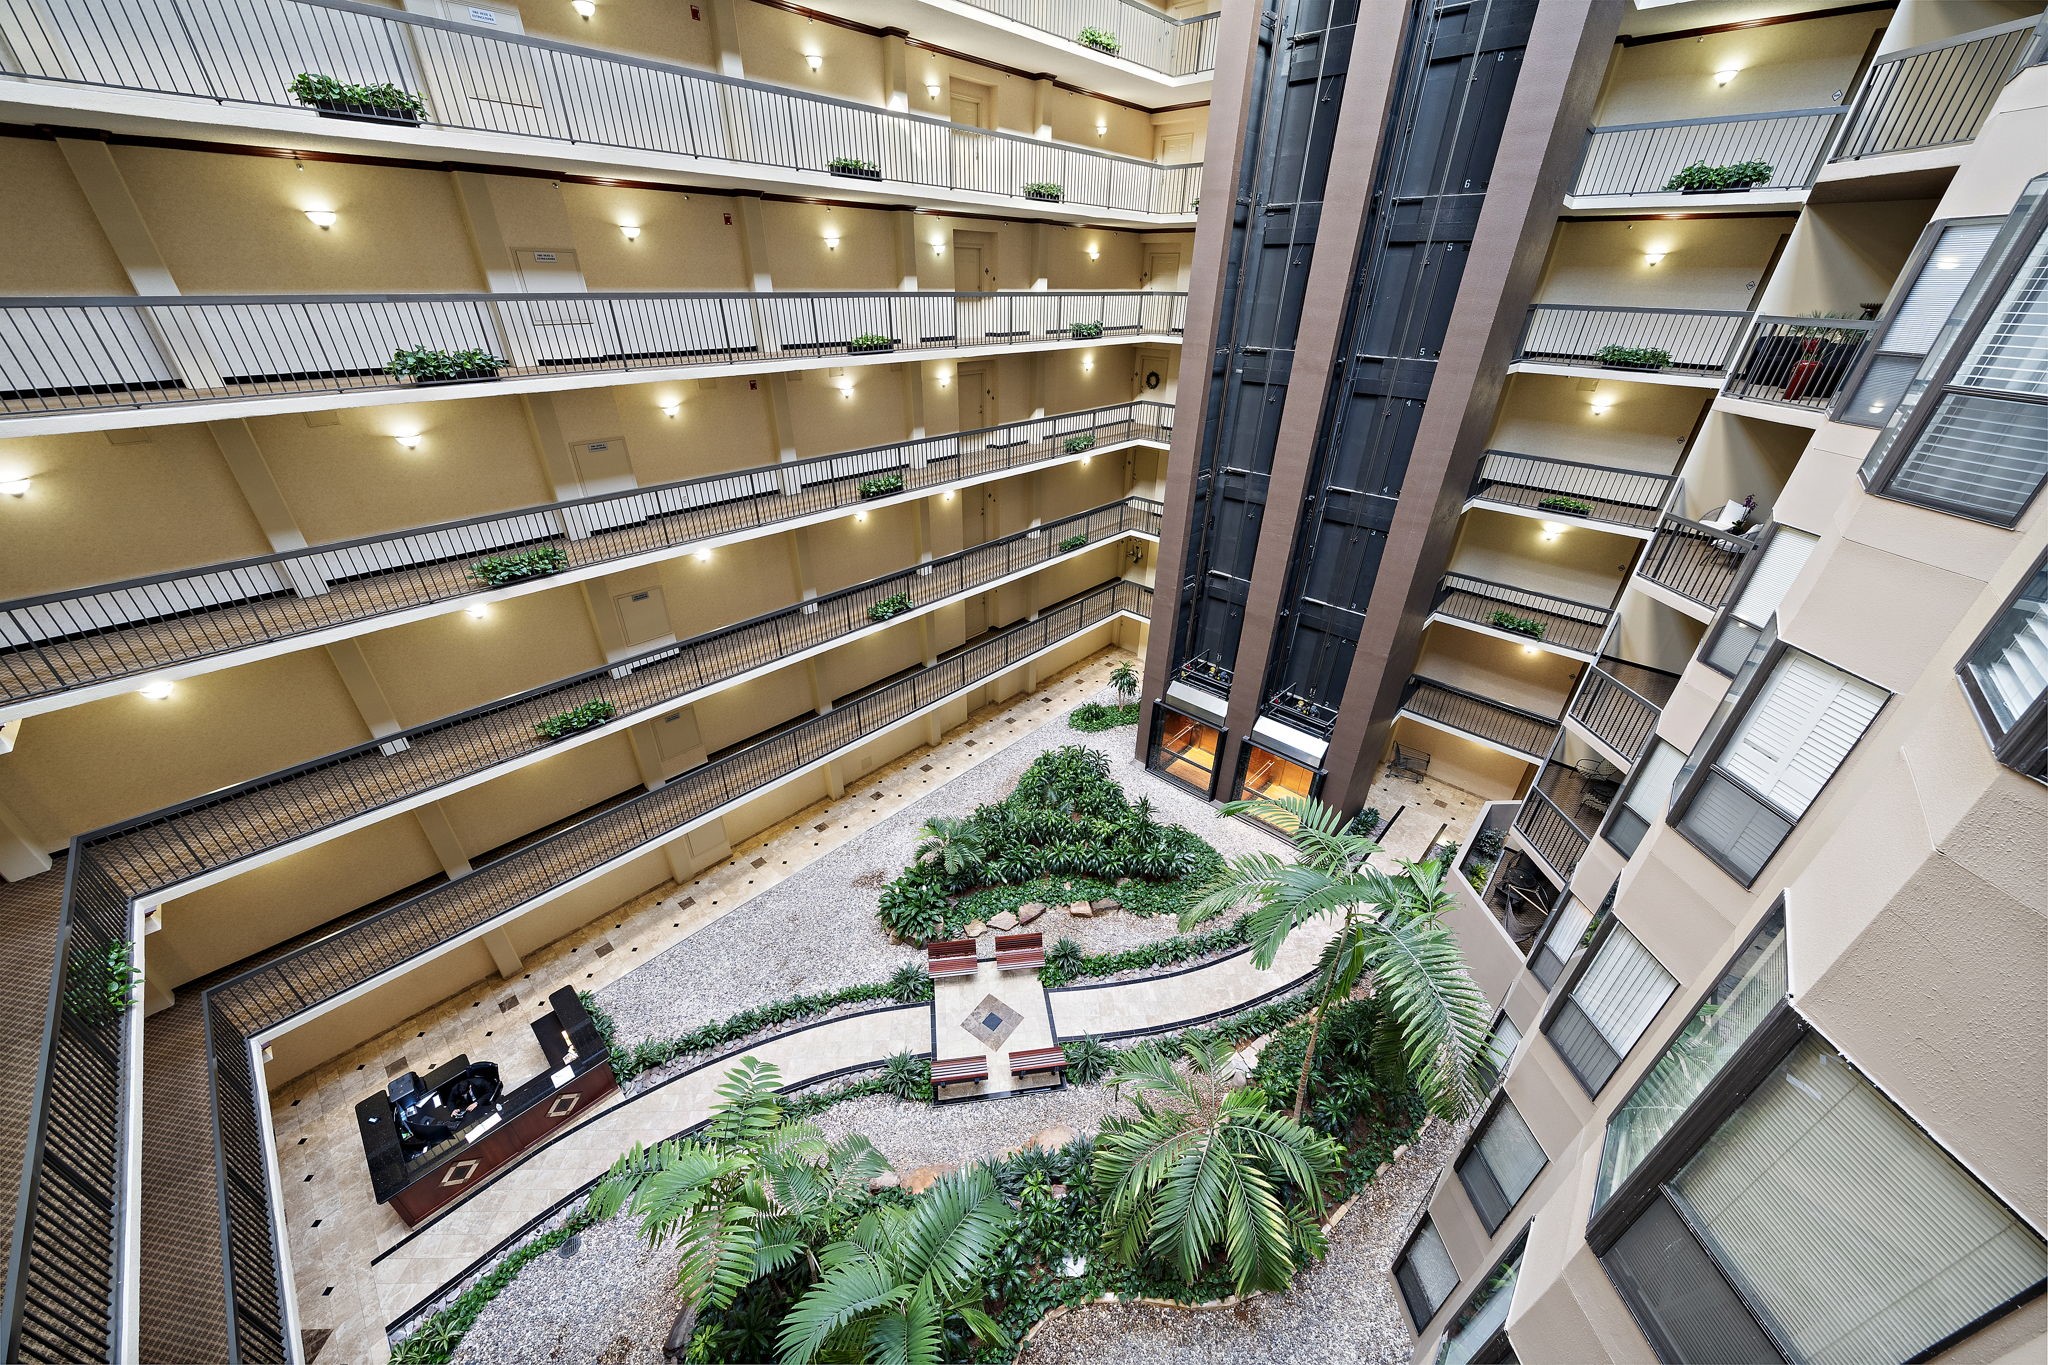 Atrium of a multi-level building with a lush indoor garden and seating area.